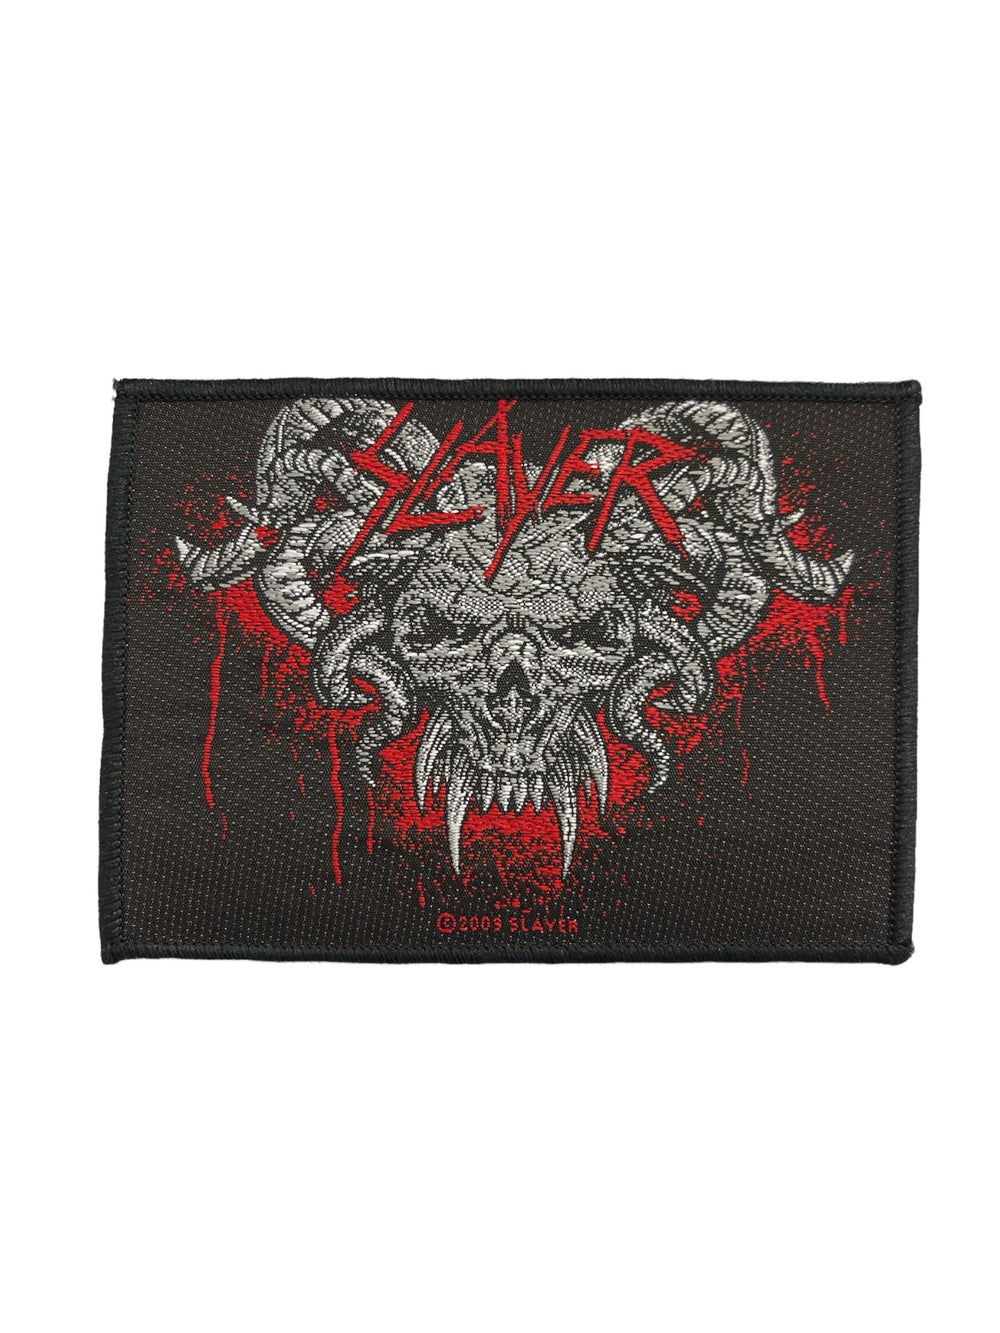 Slayer Demonic Official Woven Patch Brand New